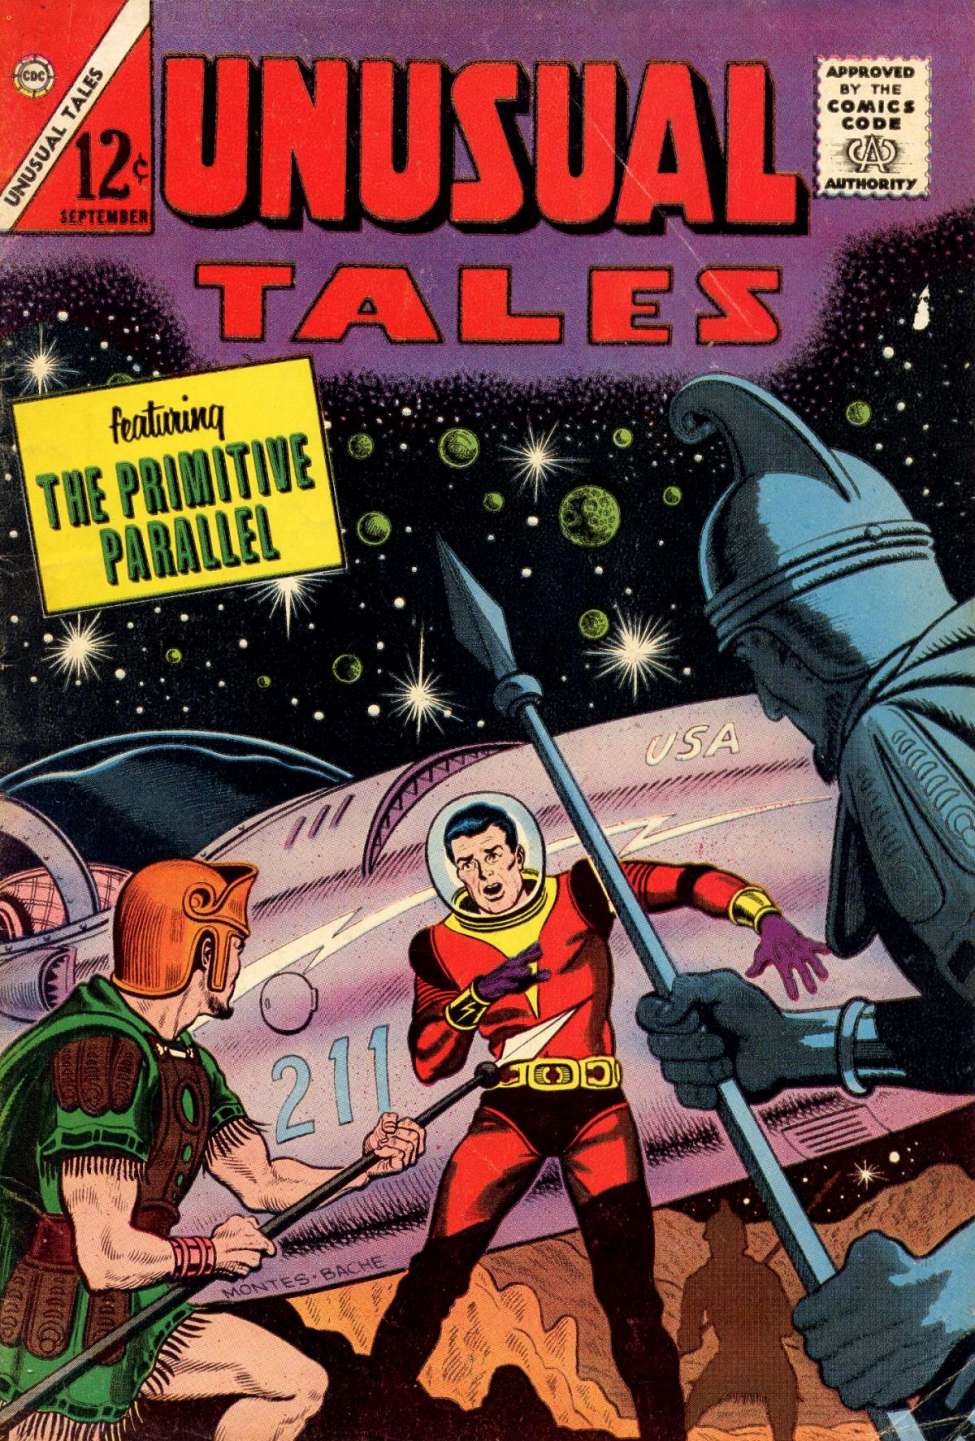 Book Cover For Unusual Tales 41 - Version 1